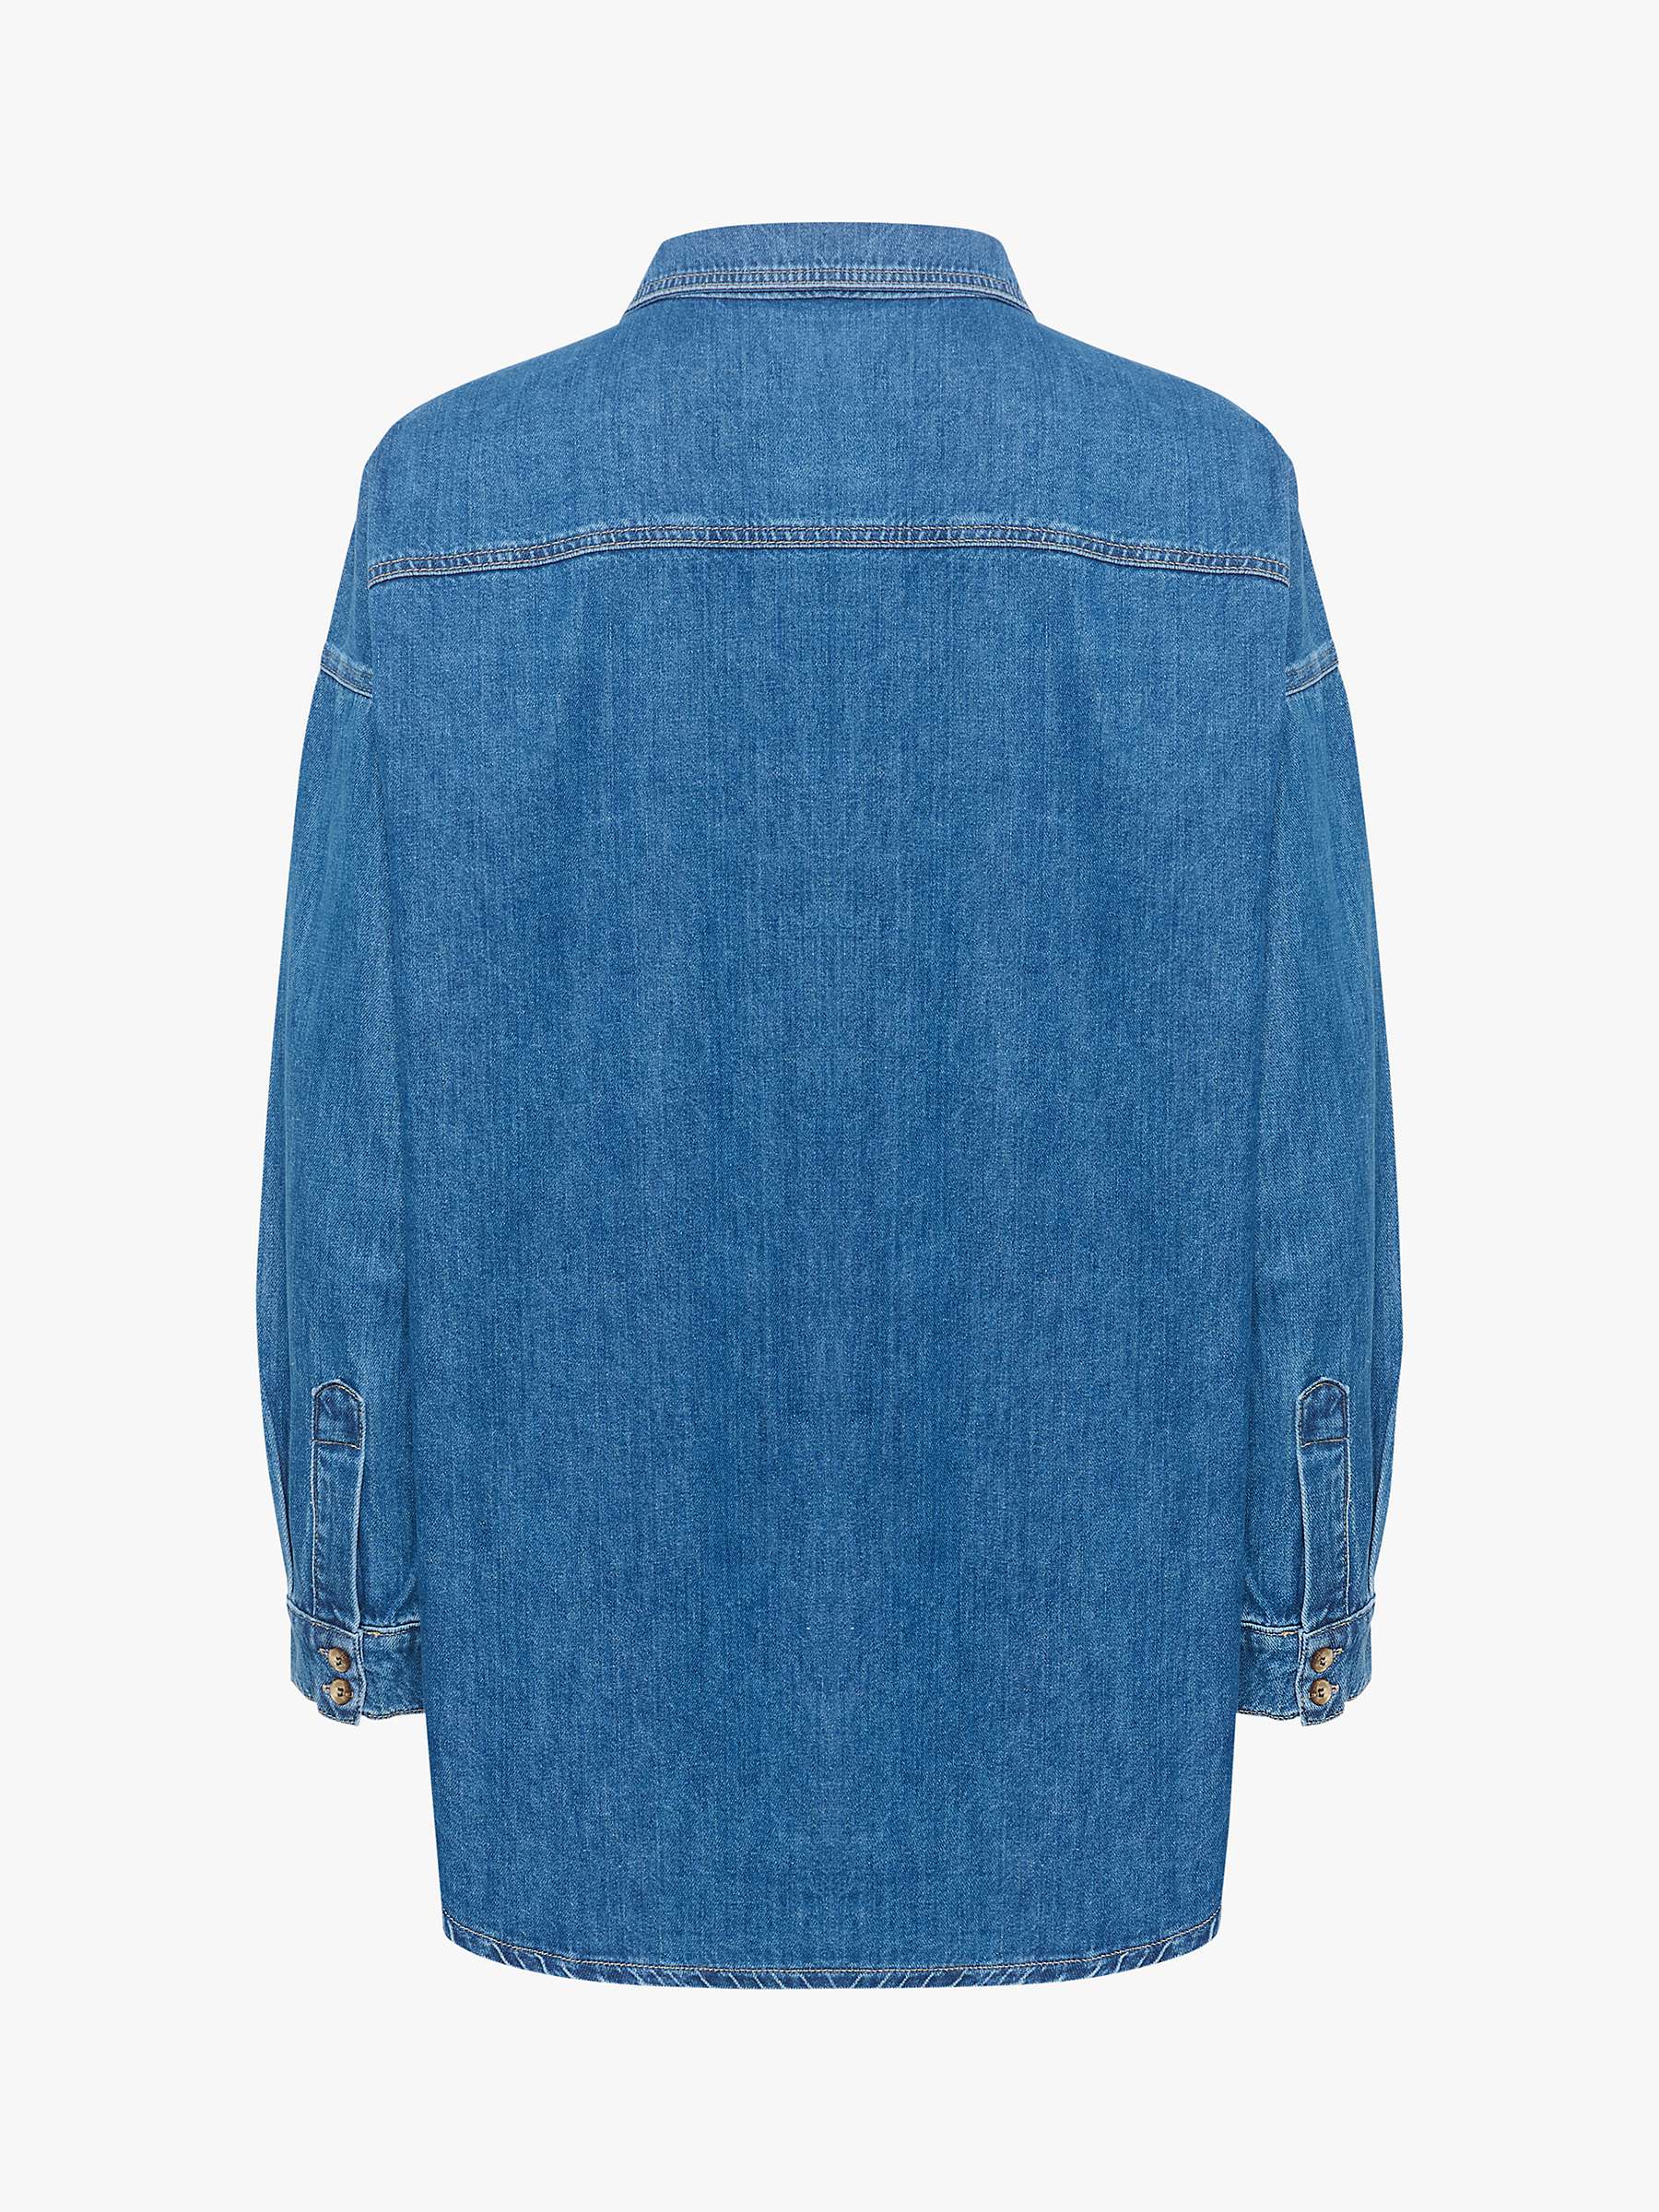 Buy MY ESSENTIAL WARDROBE Malo Relaxed Fit Denim Shirt, Blue Vintage Wash Online at johnlewis.com